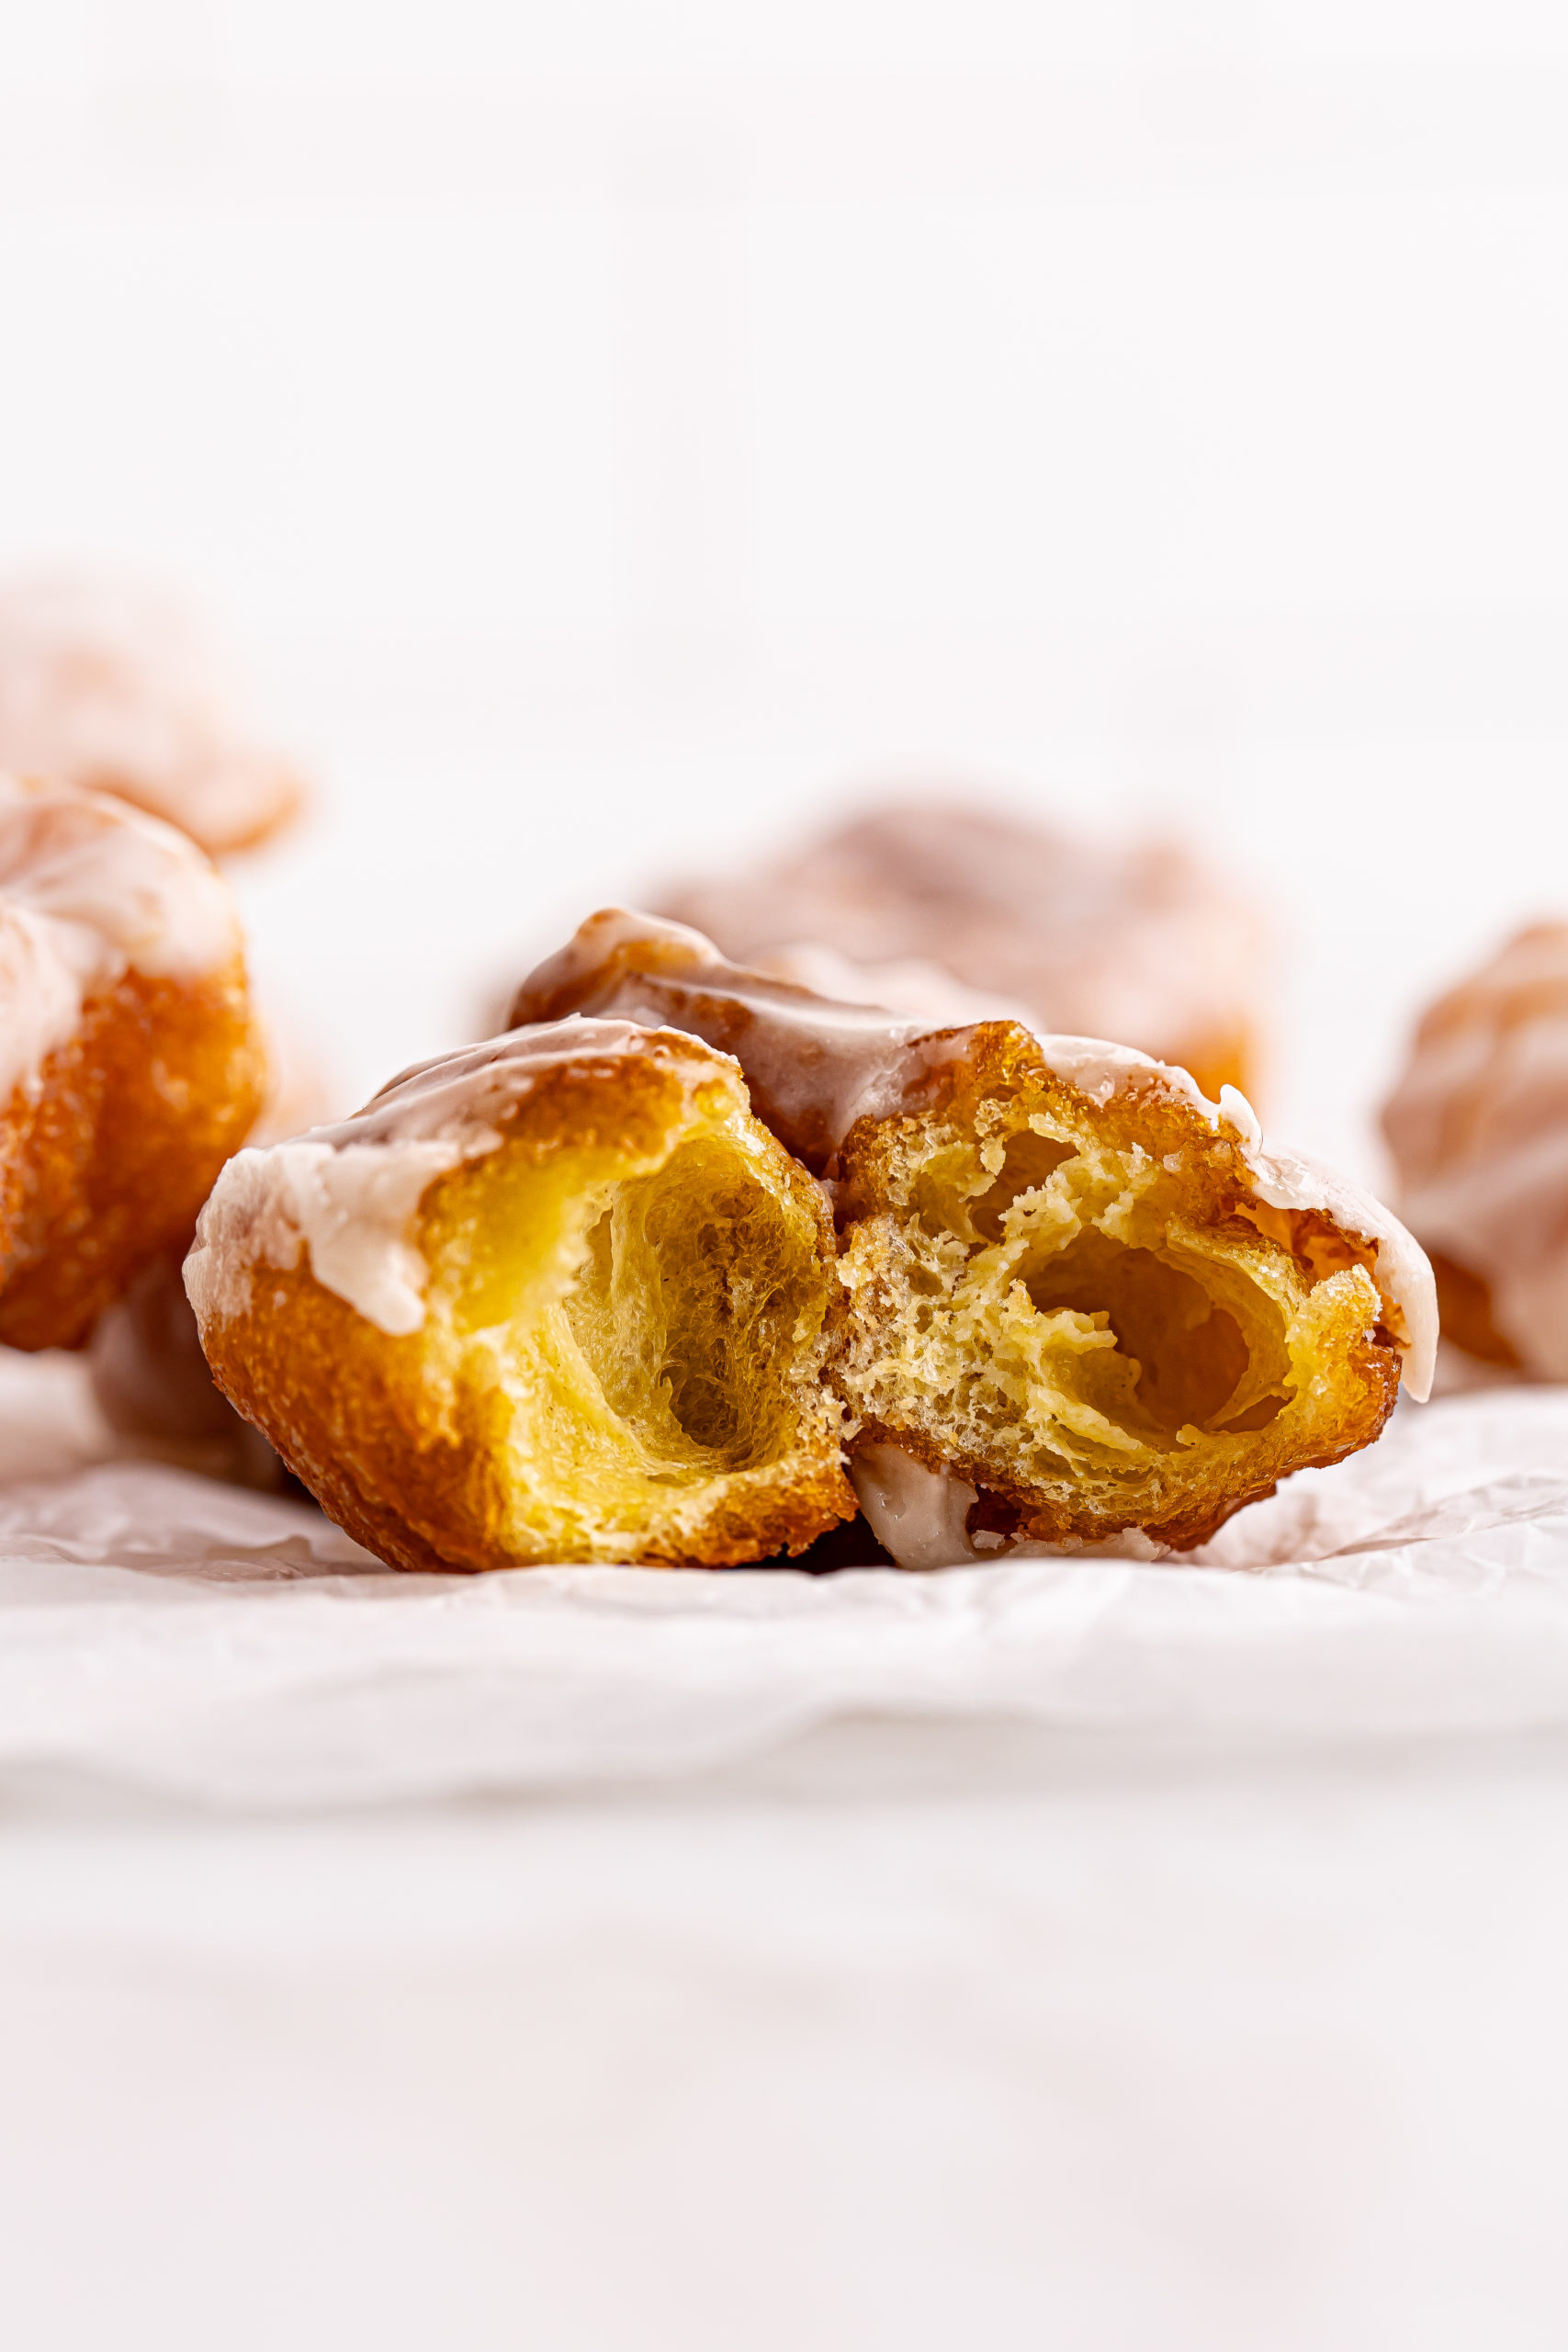 Halved French cruller to show airy interior